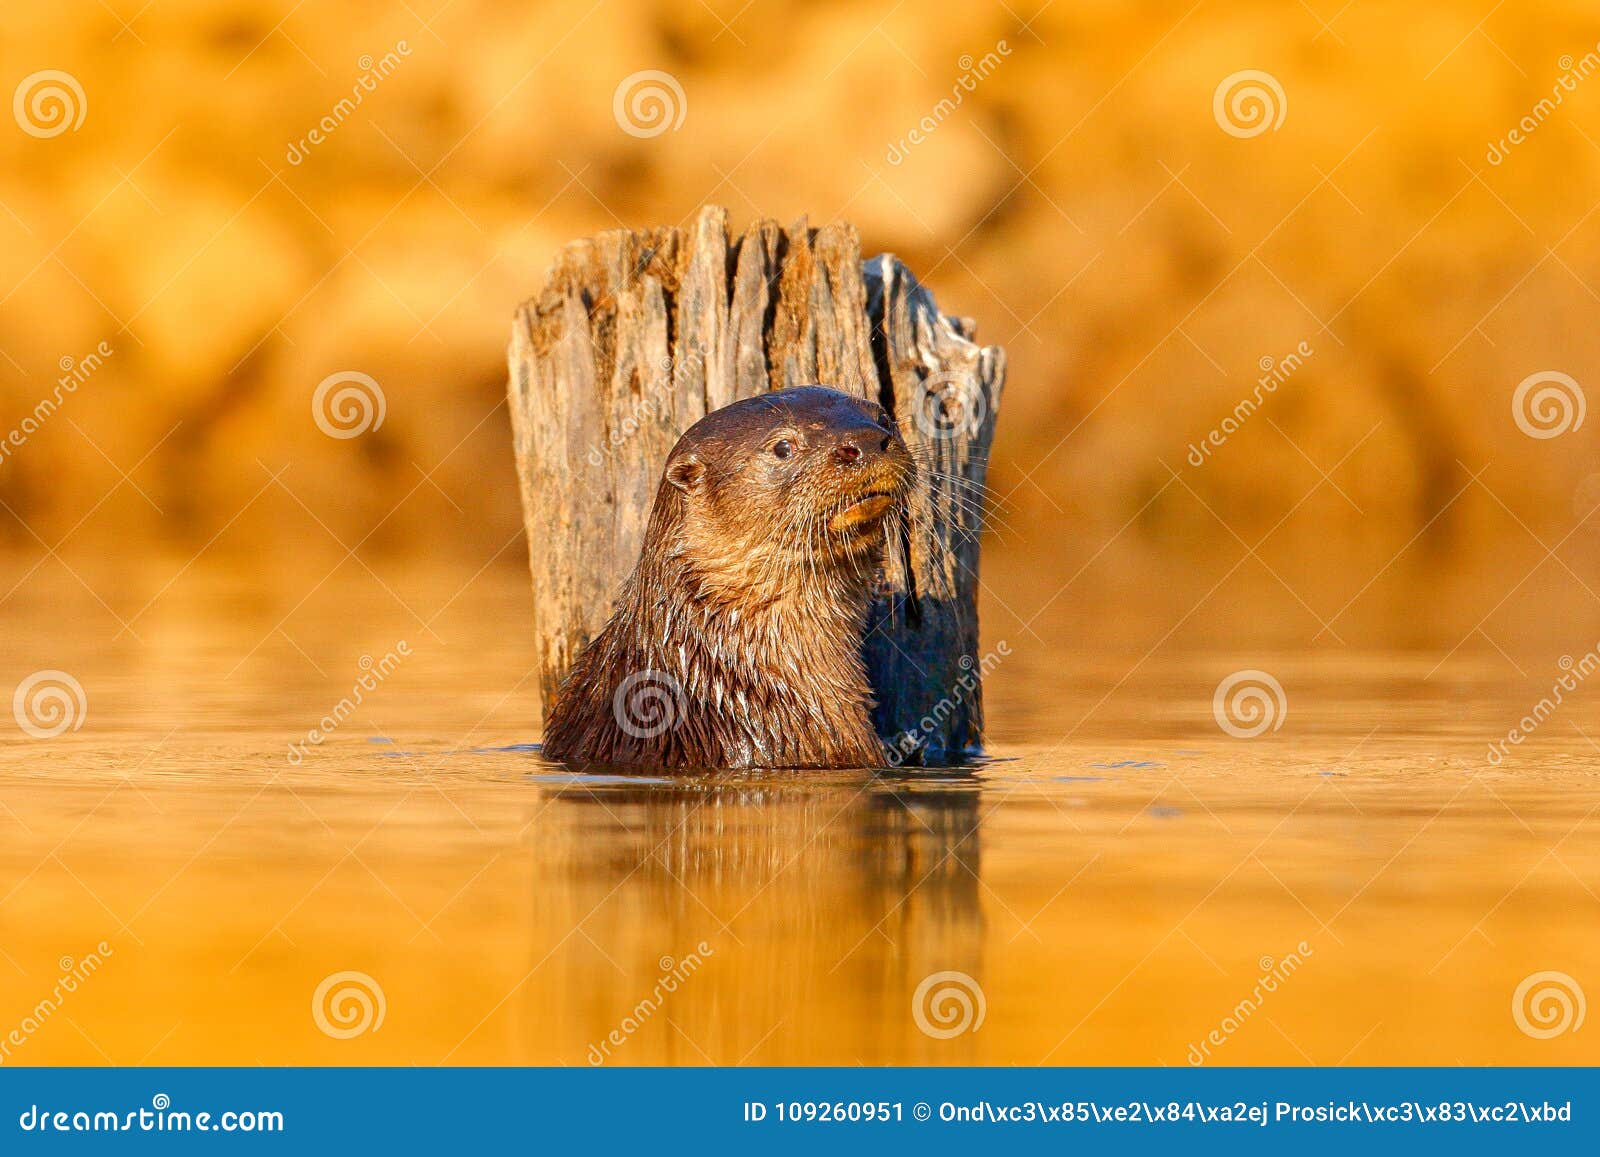 otter in orange evening light water. giant otter, pteronura brasiliensis, portrait in the river water level, rio negro, pantanal,